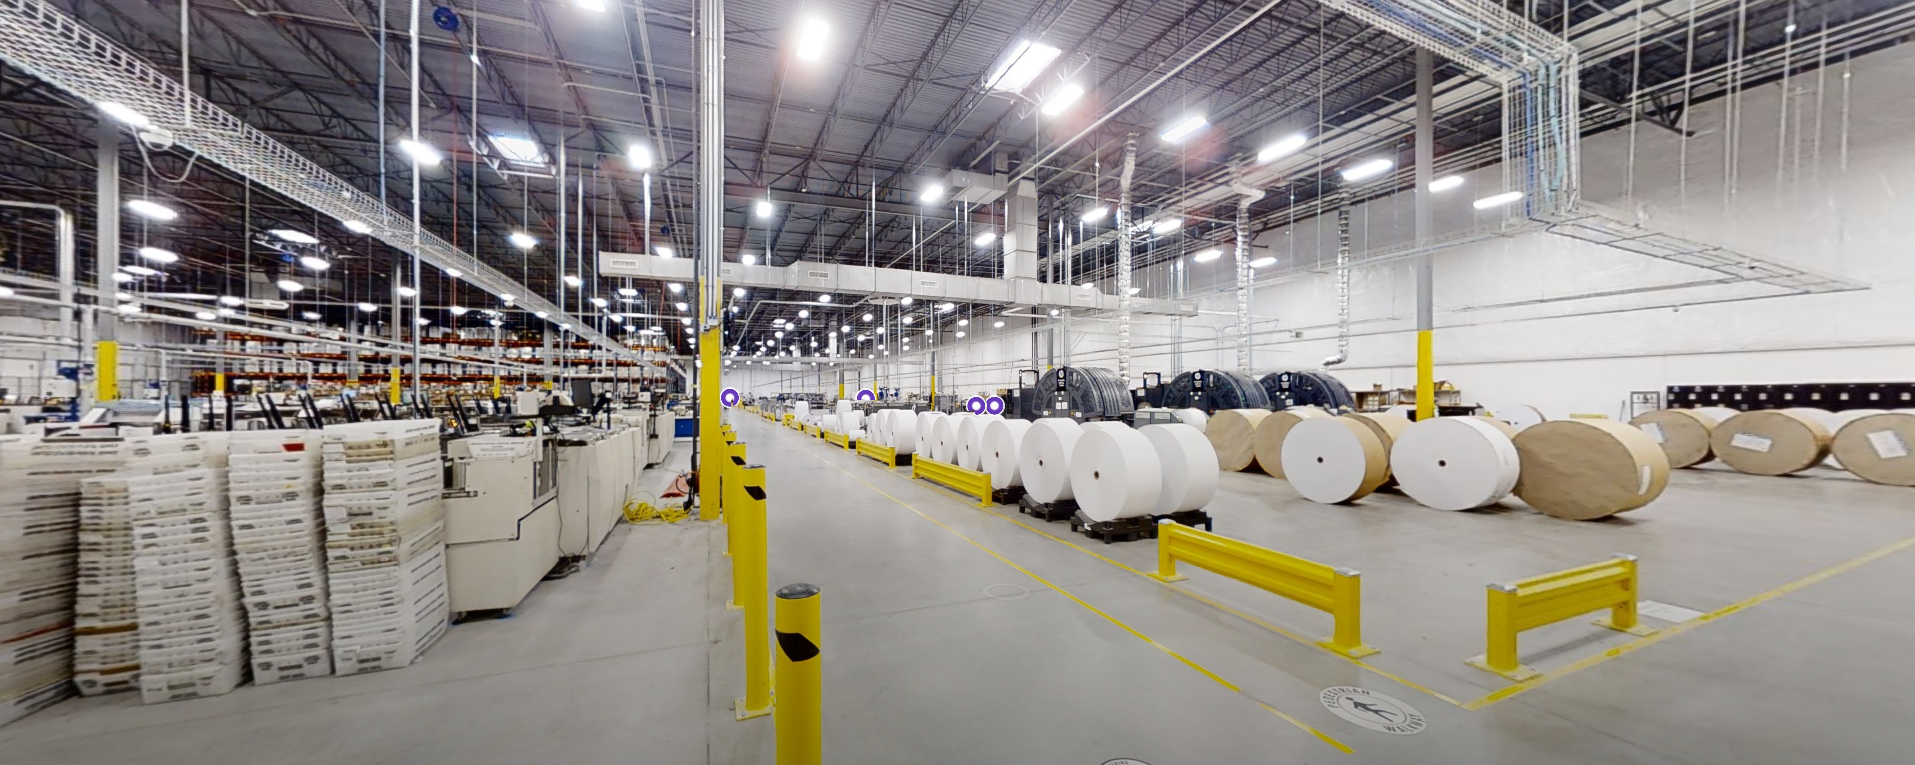 Interior view of a large industrial printing facility.